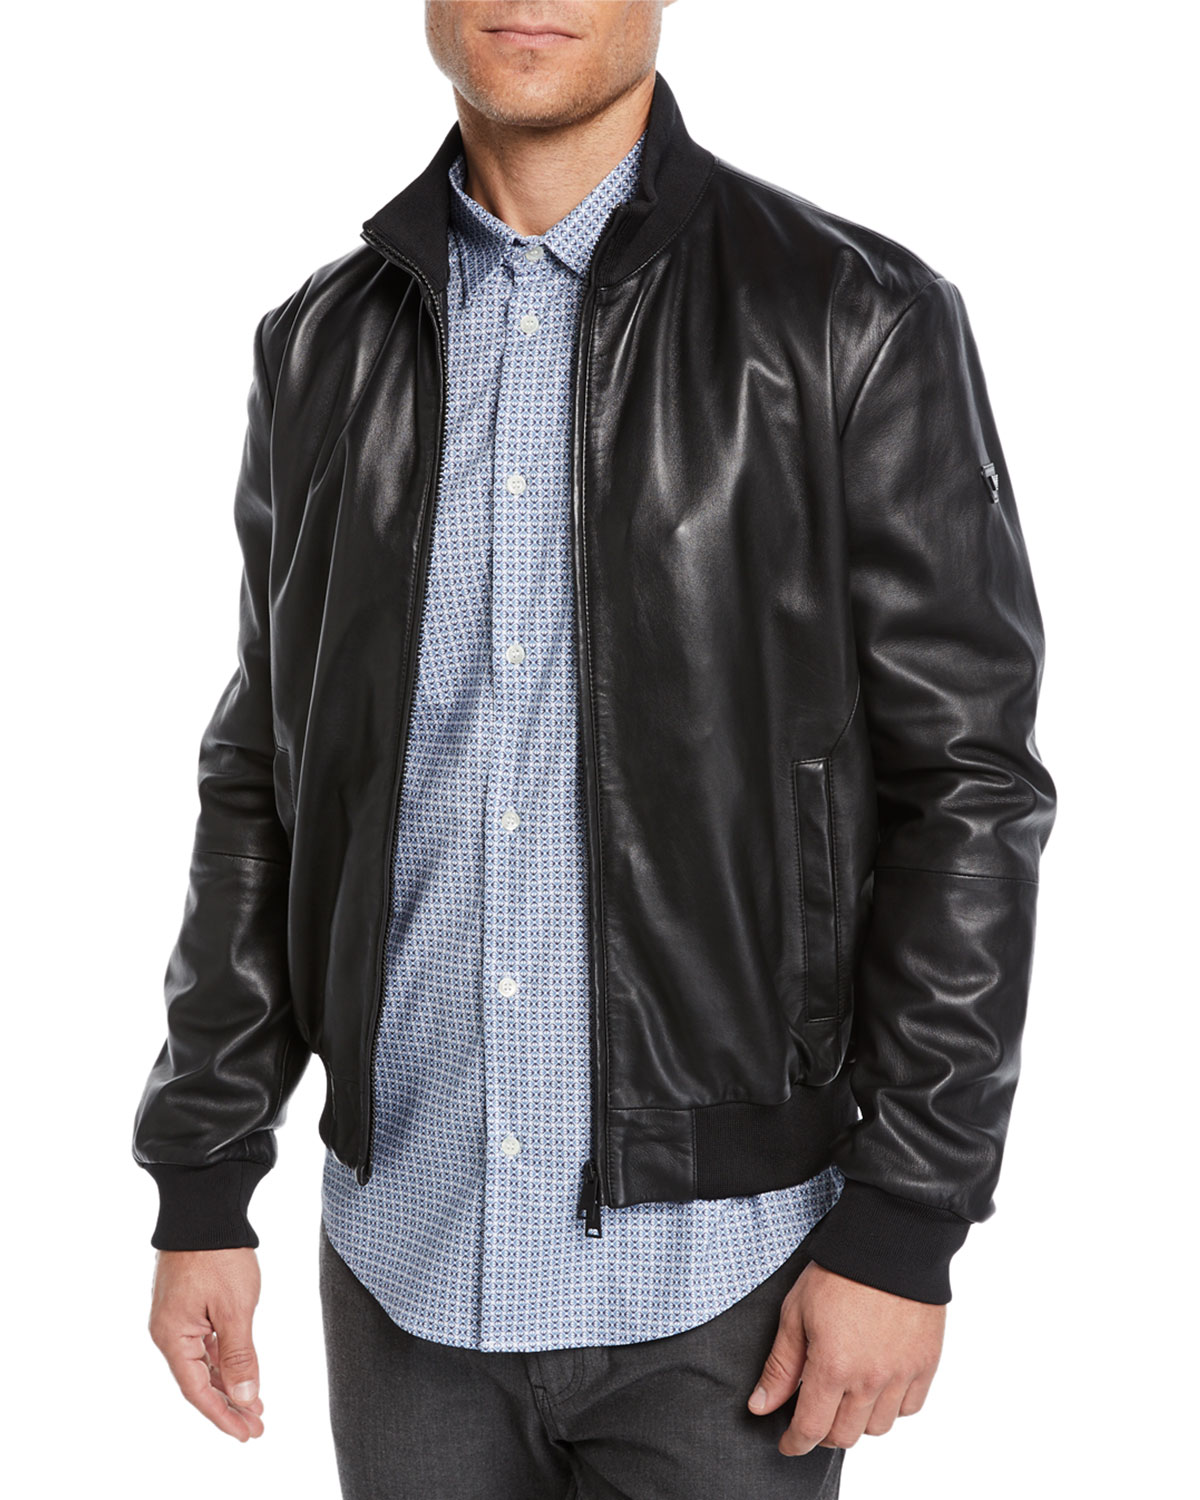 armani leather jackets,Save up to 19%,www.ilcascinone.com